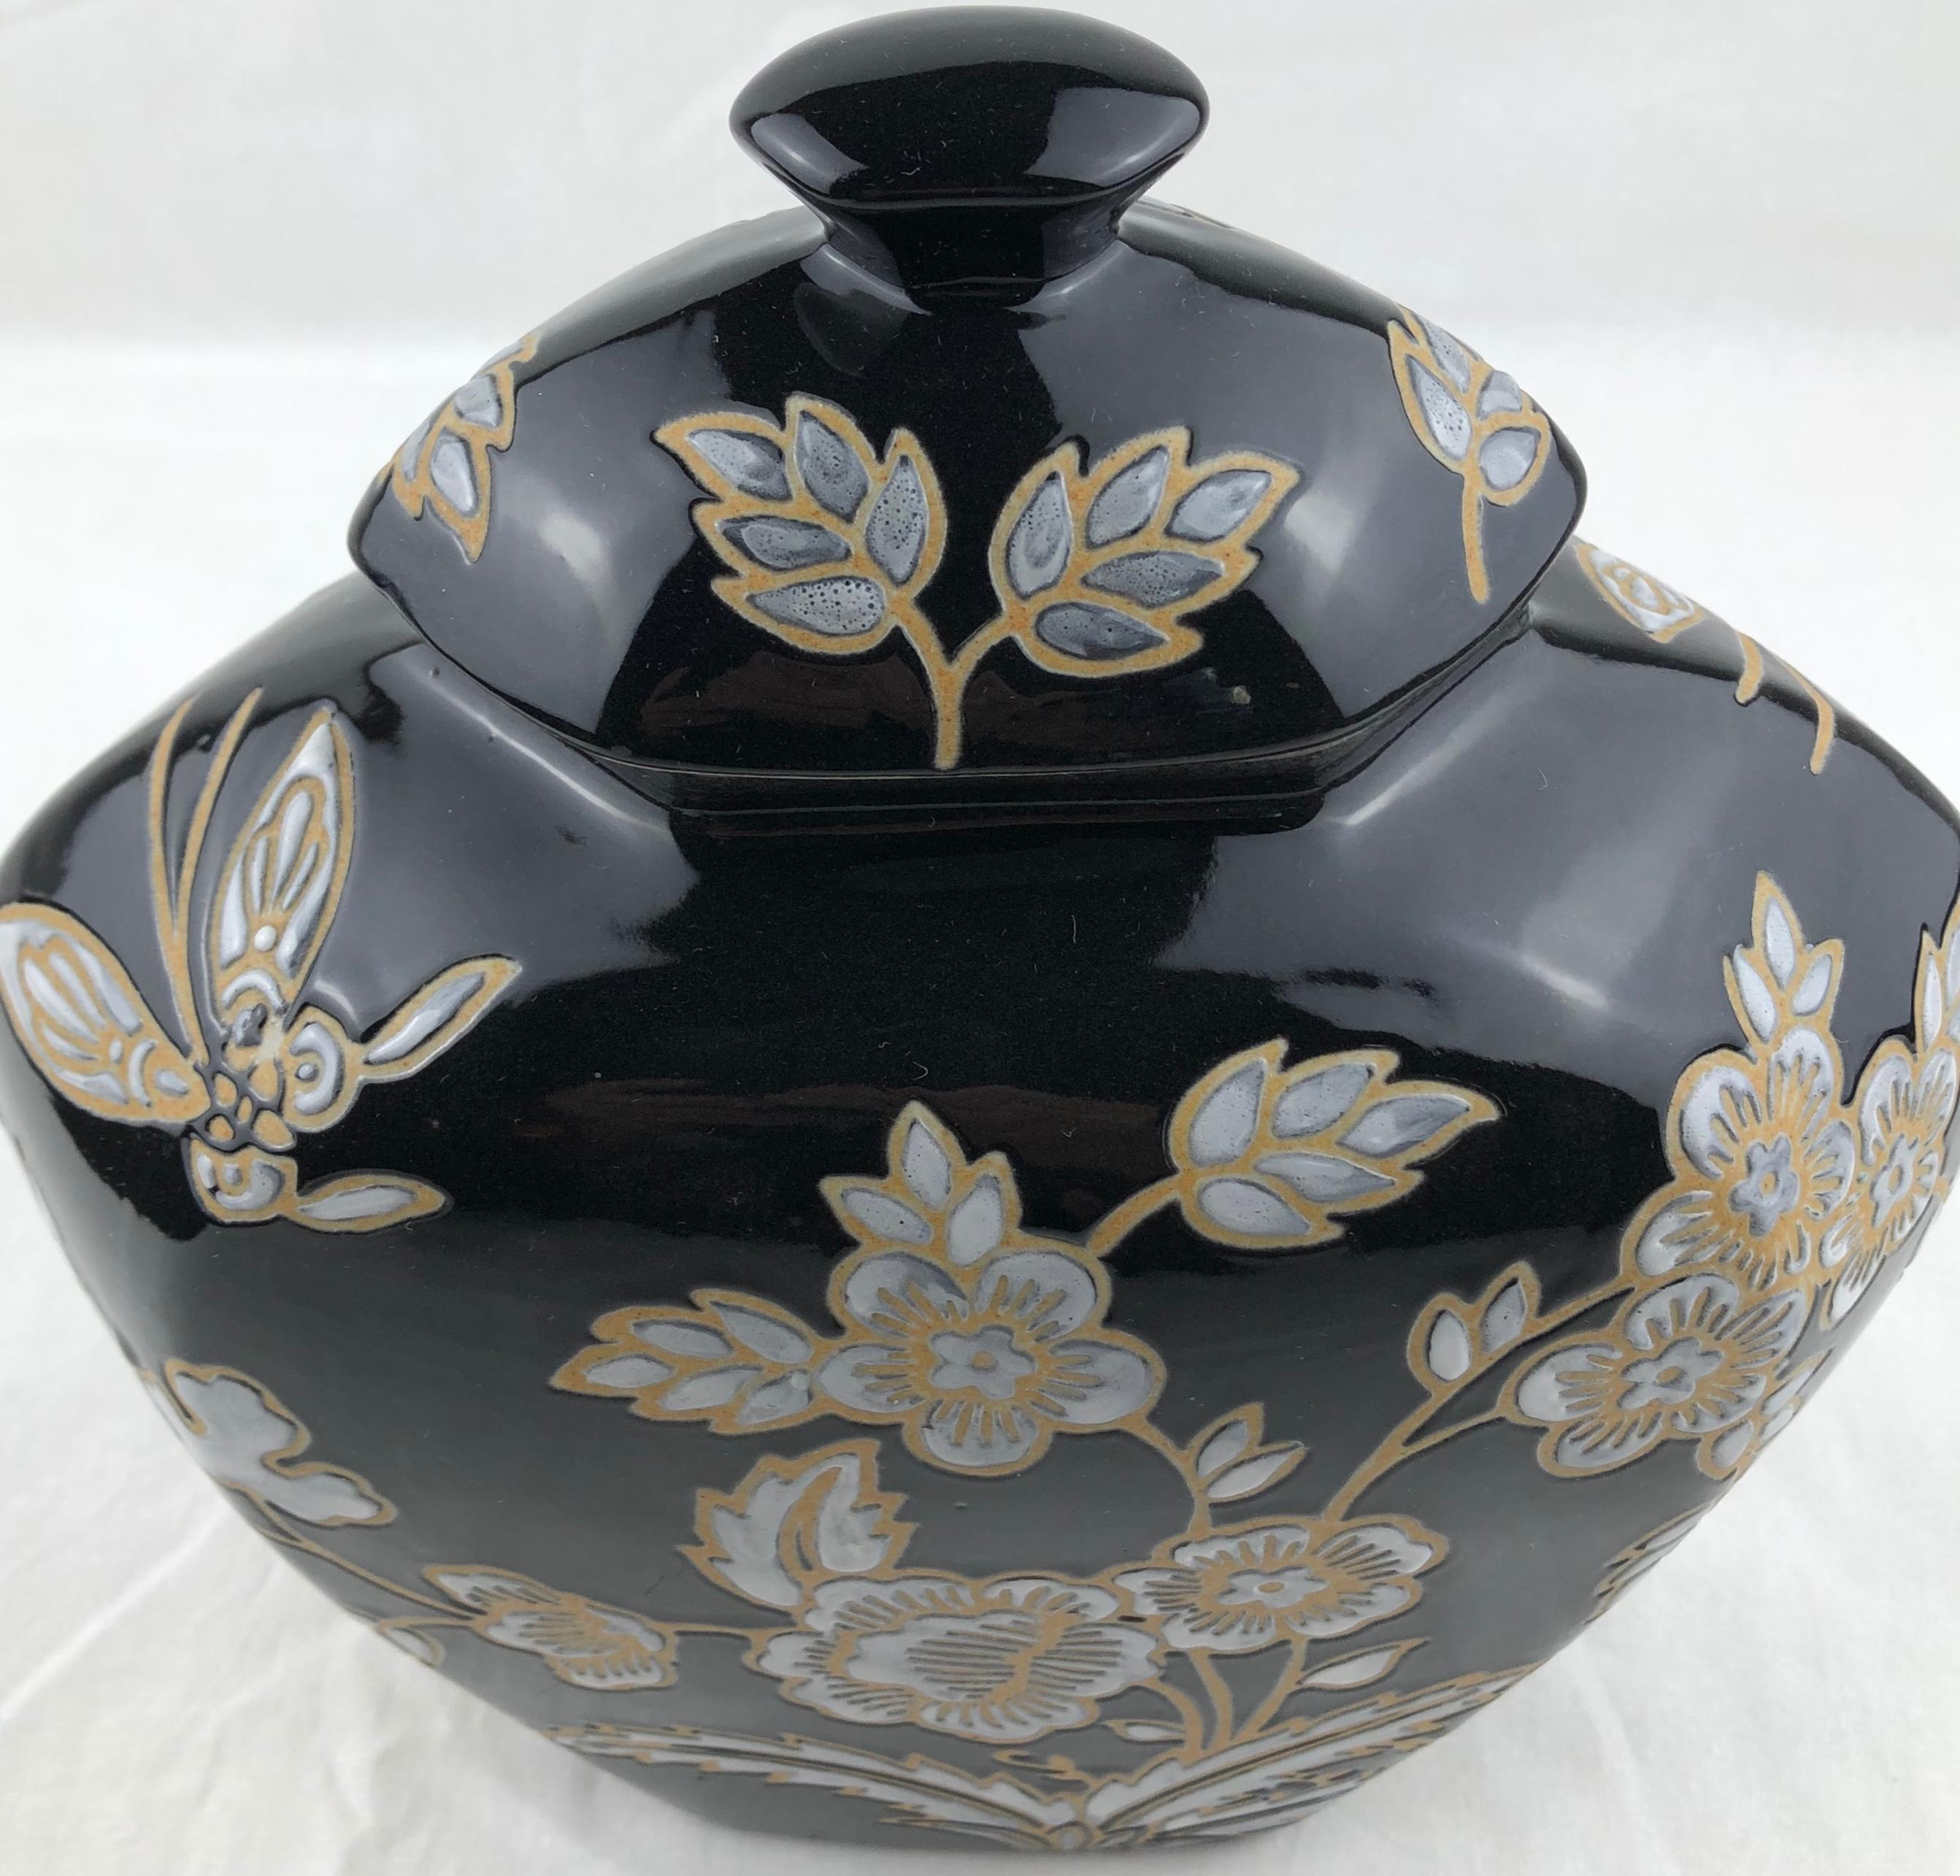 Porcelain French Black and Antique White Majolica Lidded Jar with Molded Floral Decor For Sale